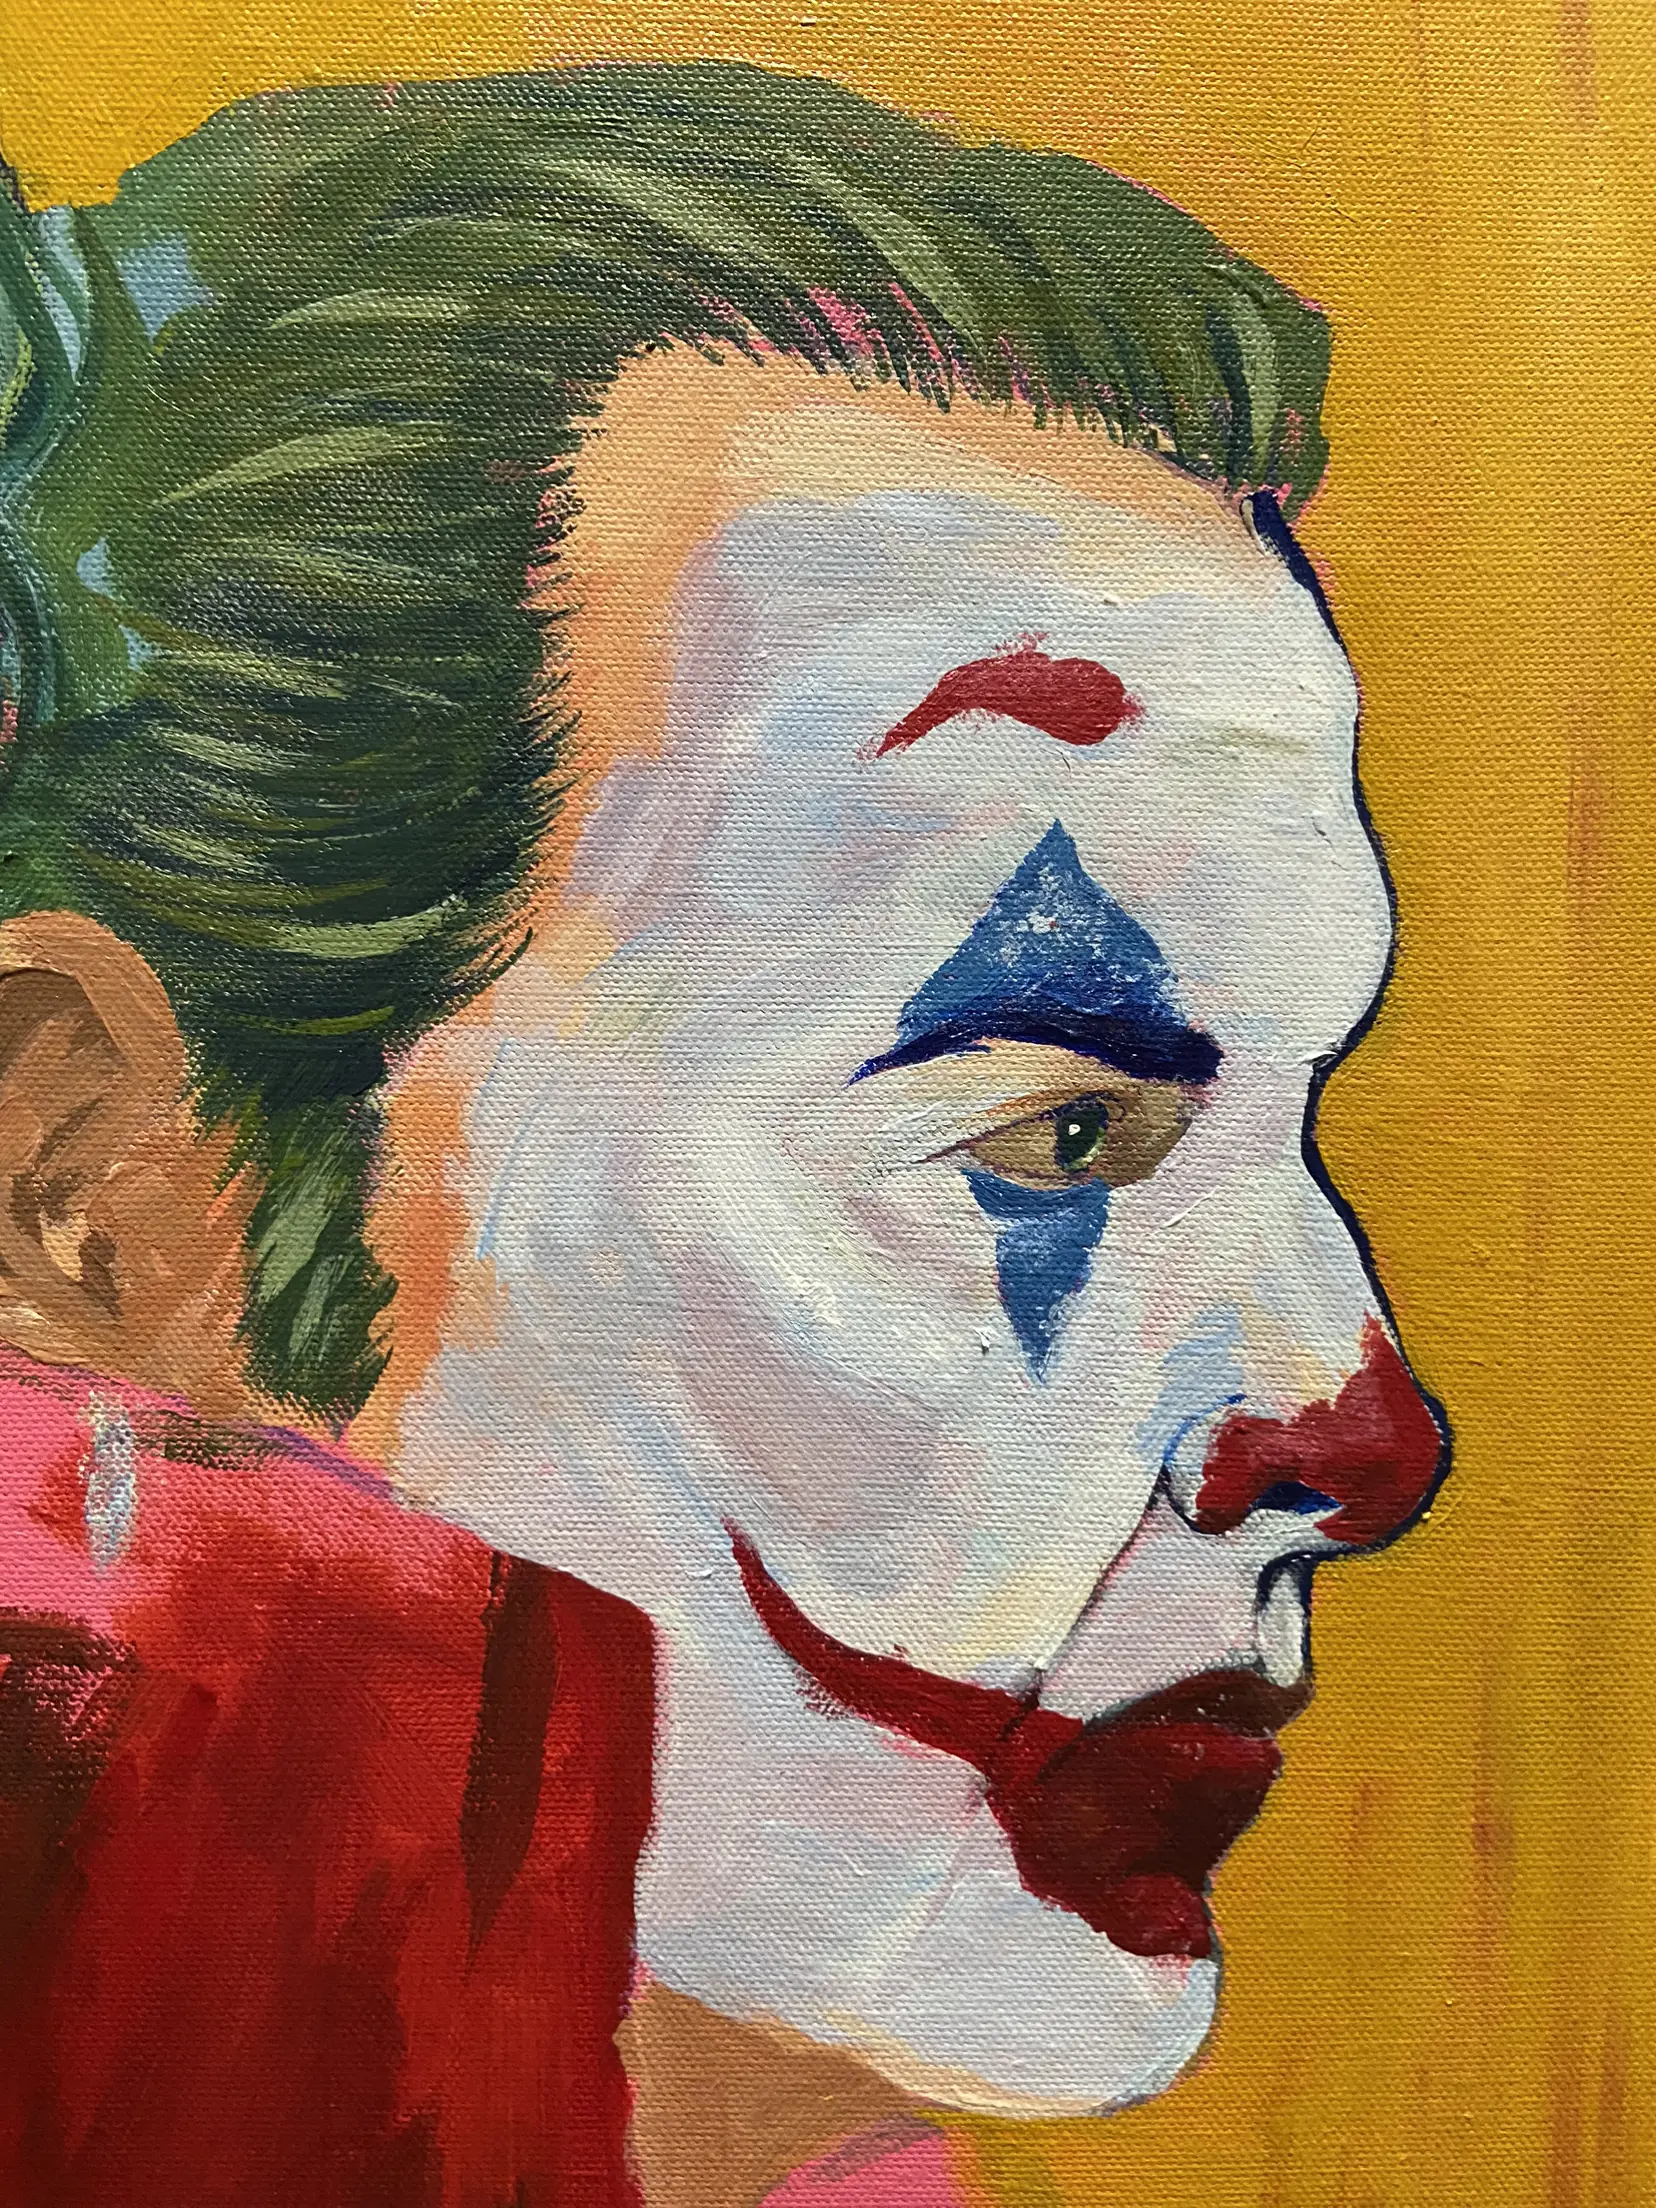 A painting of the joker🤡, Gallery posted by Kiely